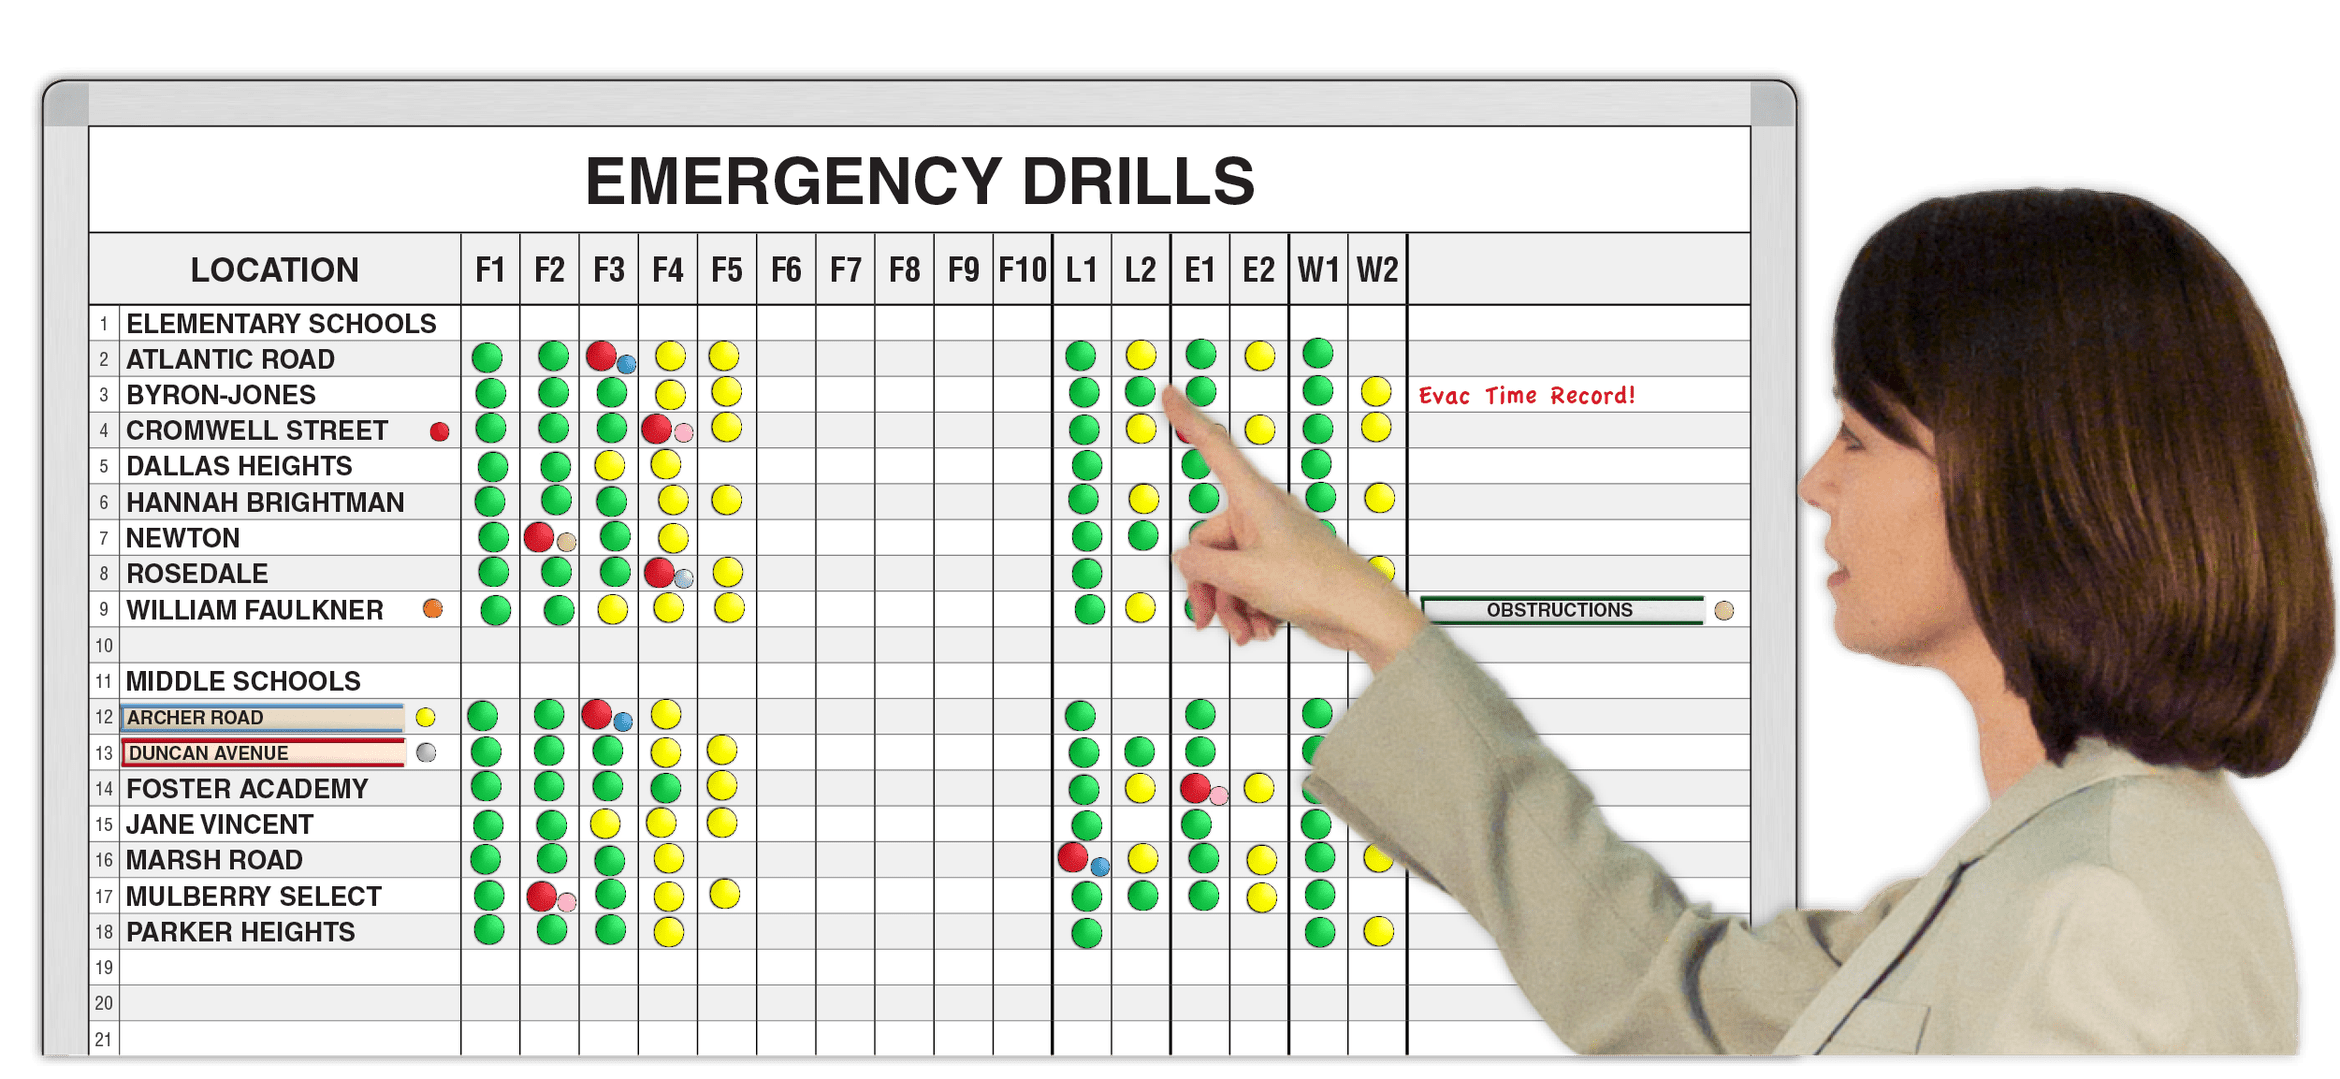 School Year Emergency Drill Schedule for School Districts